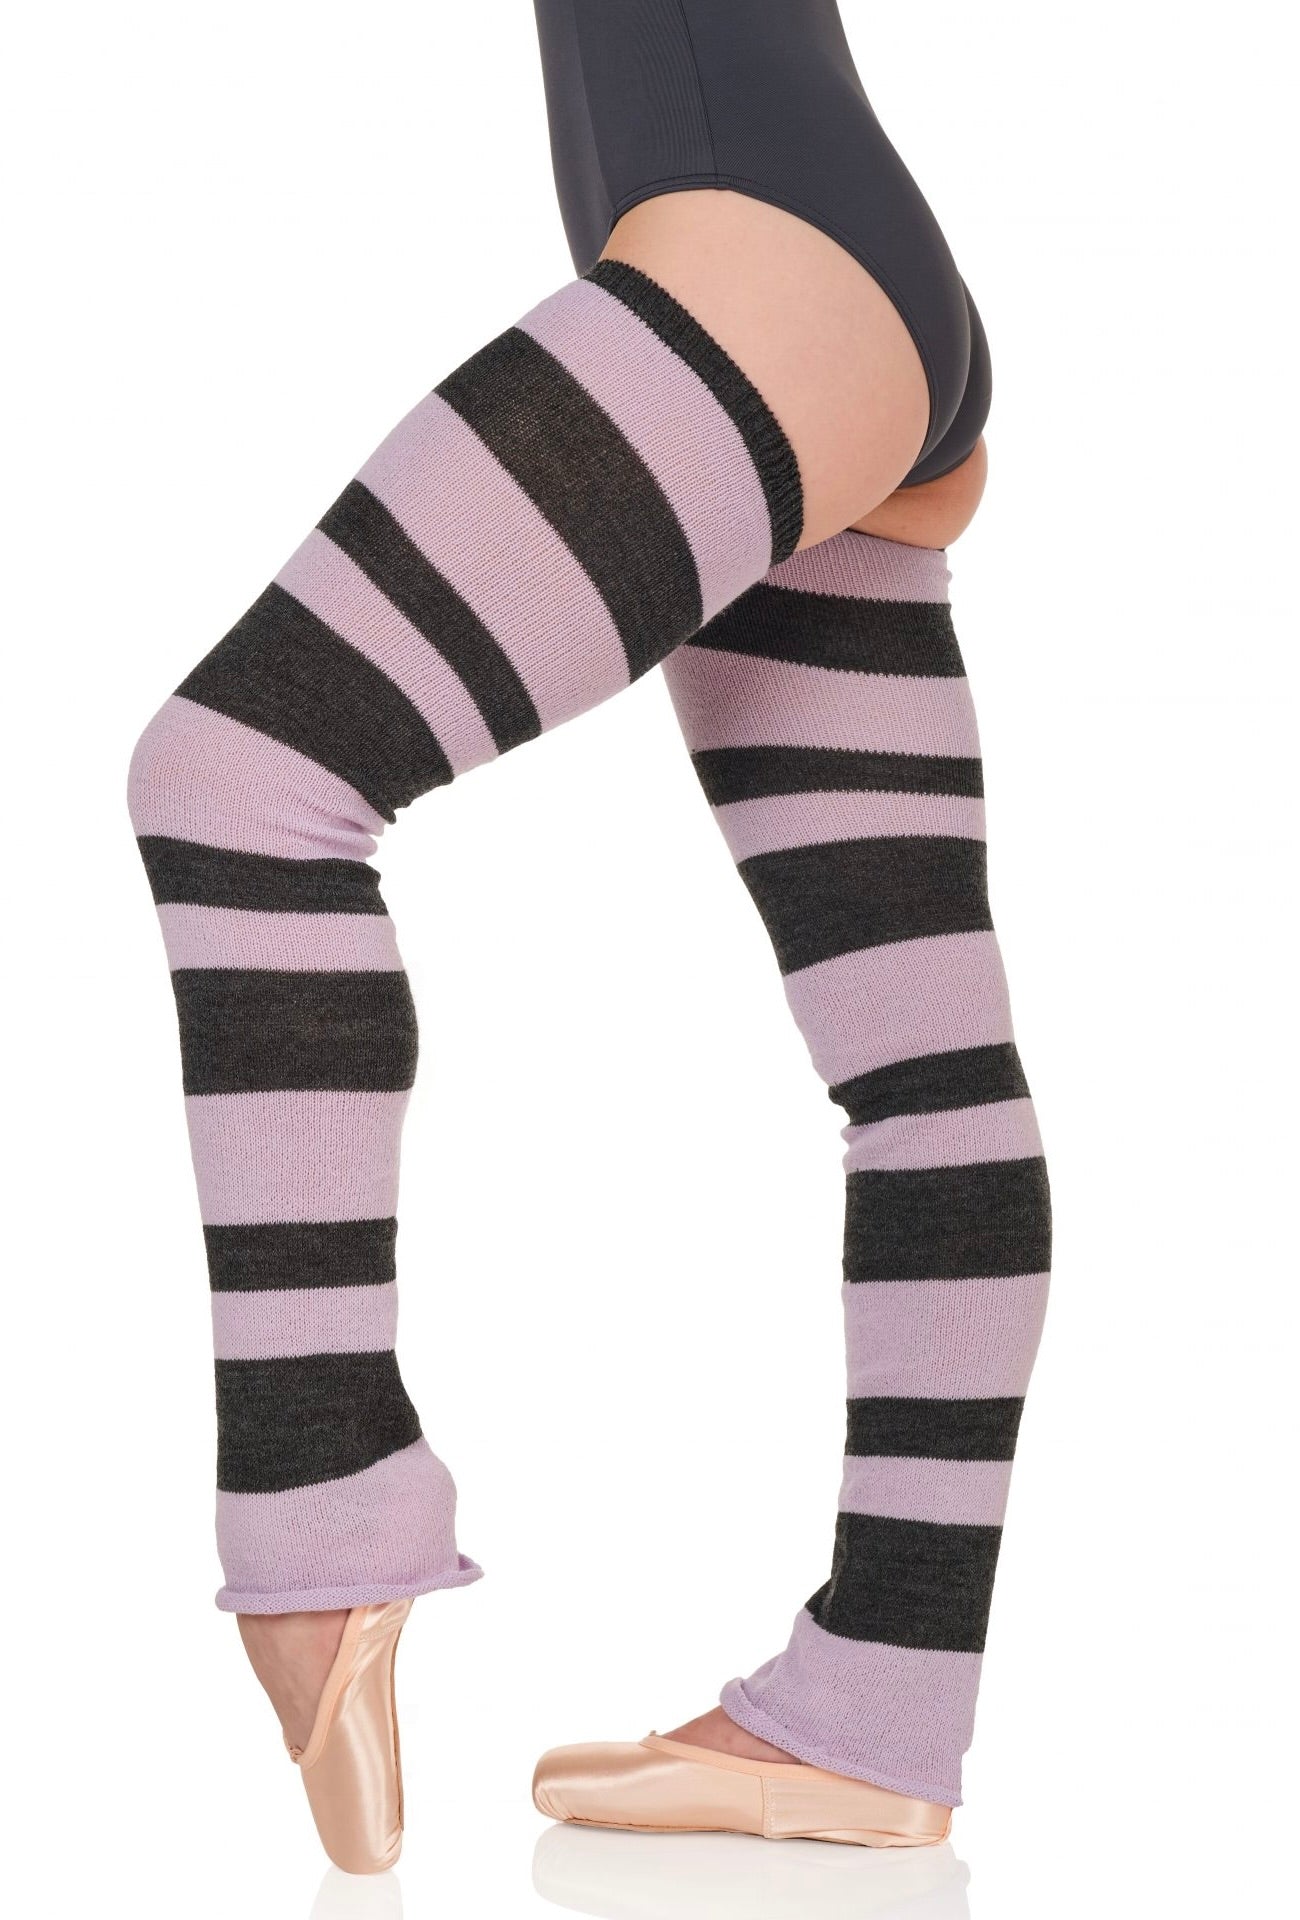 Intermezzo Polpay long legwarmers Unisex for men and women pink and black Sold by The Collective Dancewear